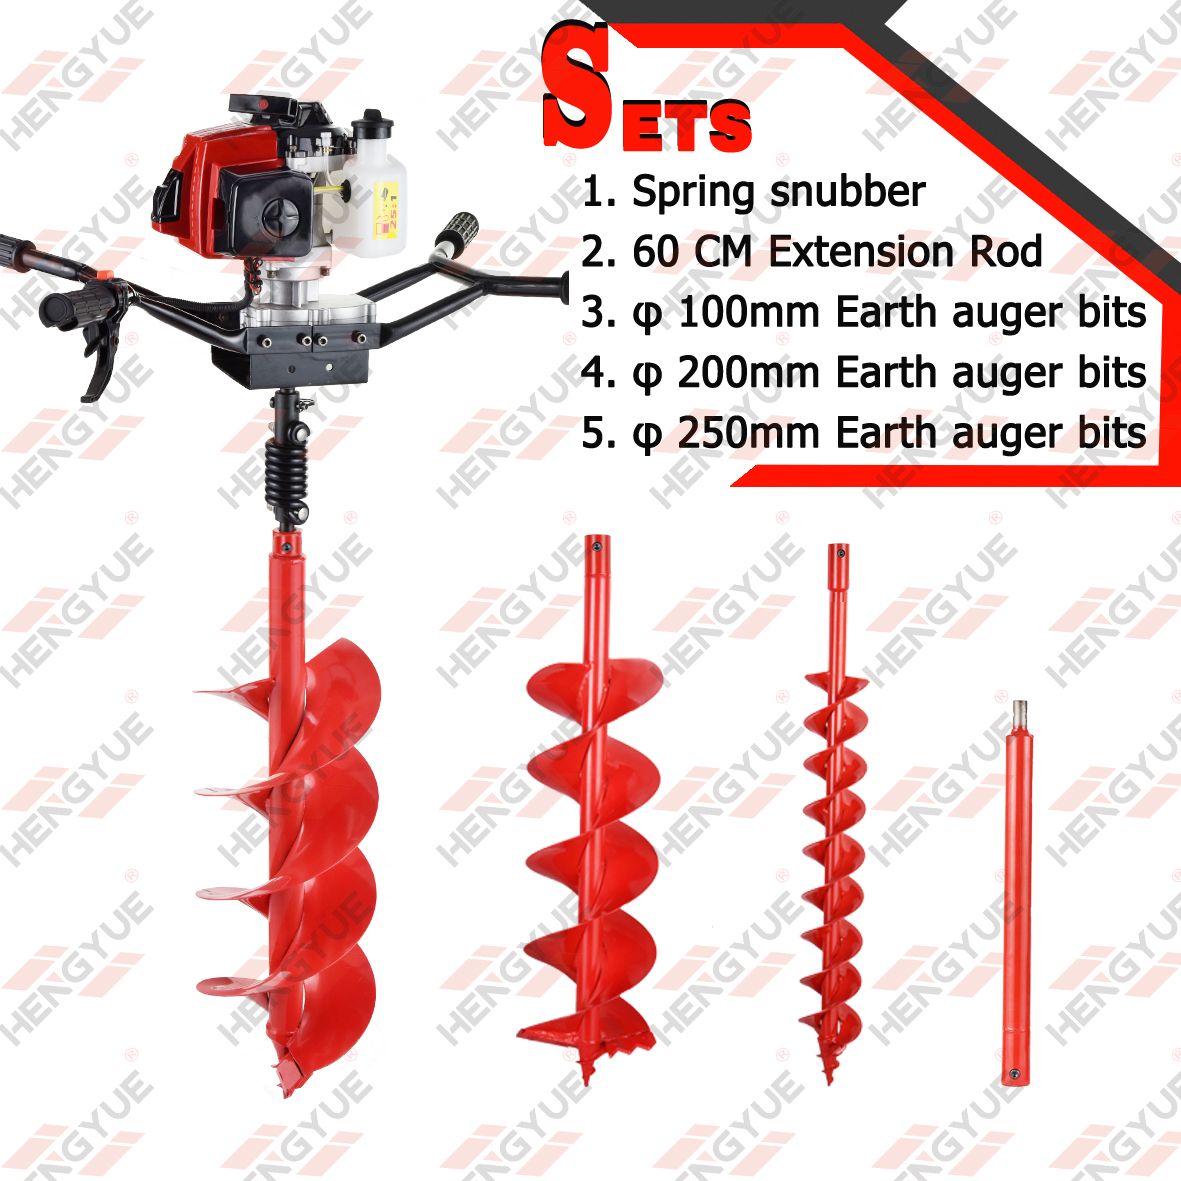 63/68cc 2 Man Operate Earth Auger Drilling Machine